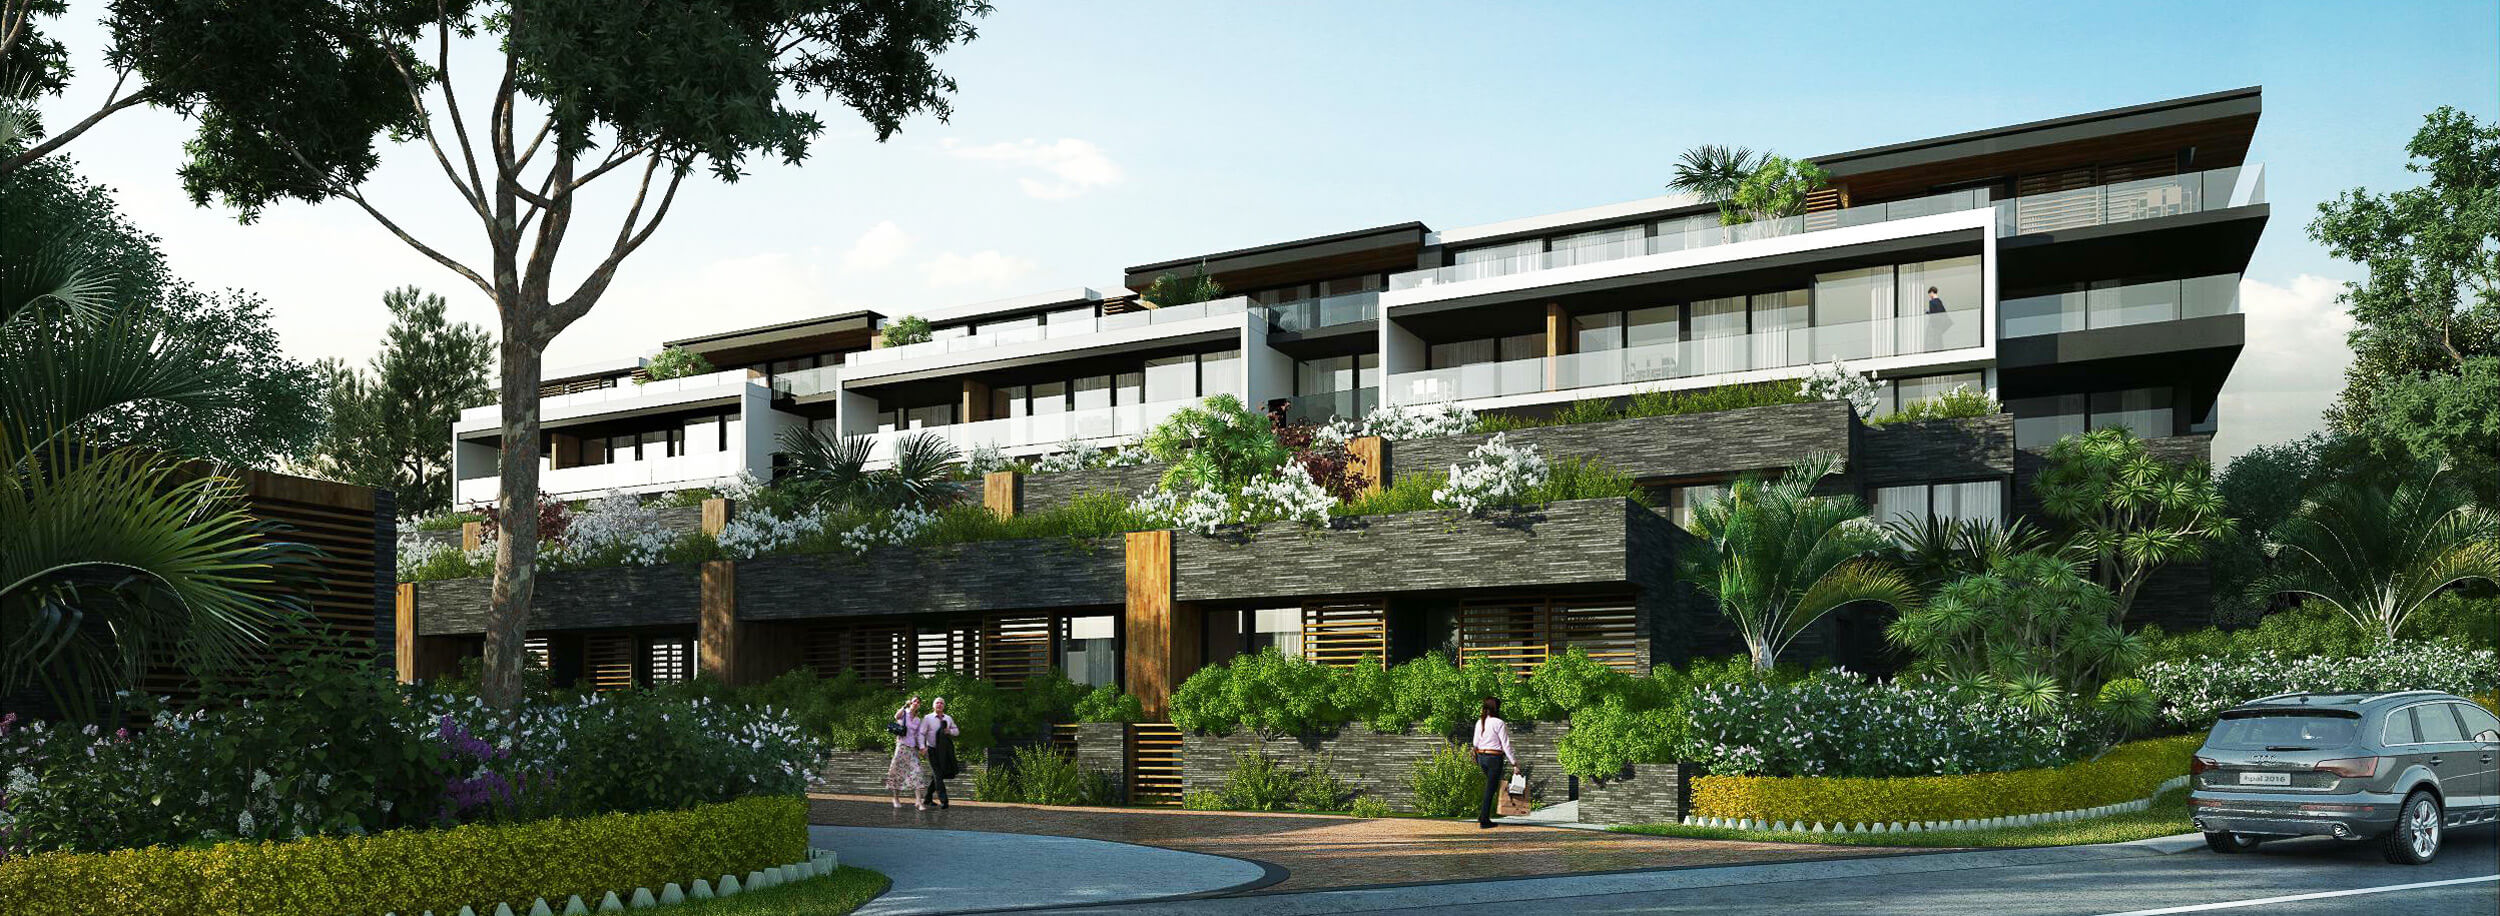 Wood Glen Aged Care Apartments